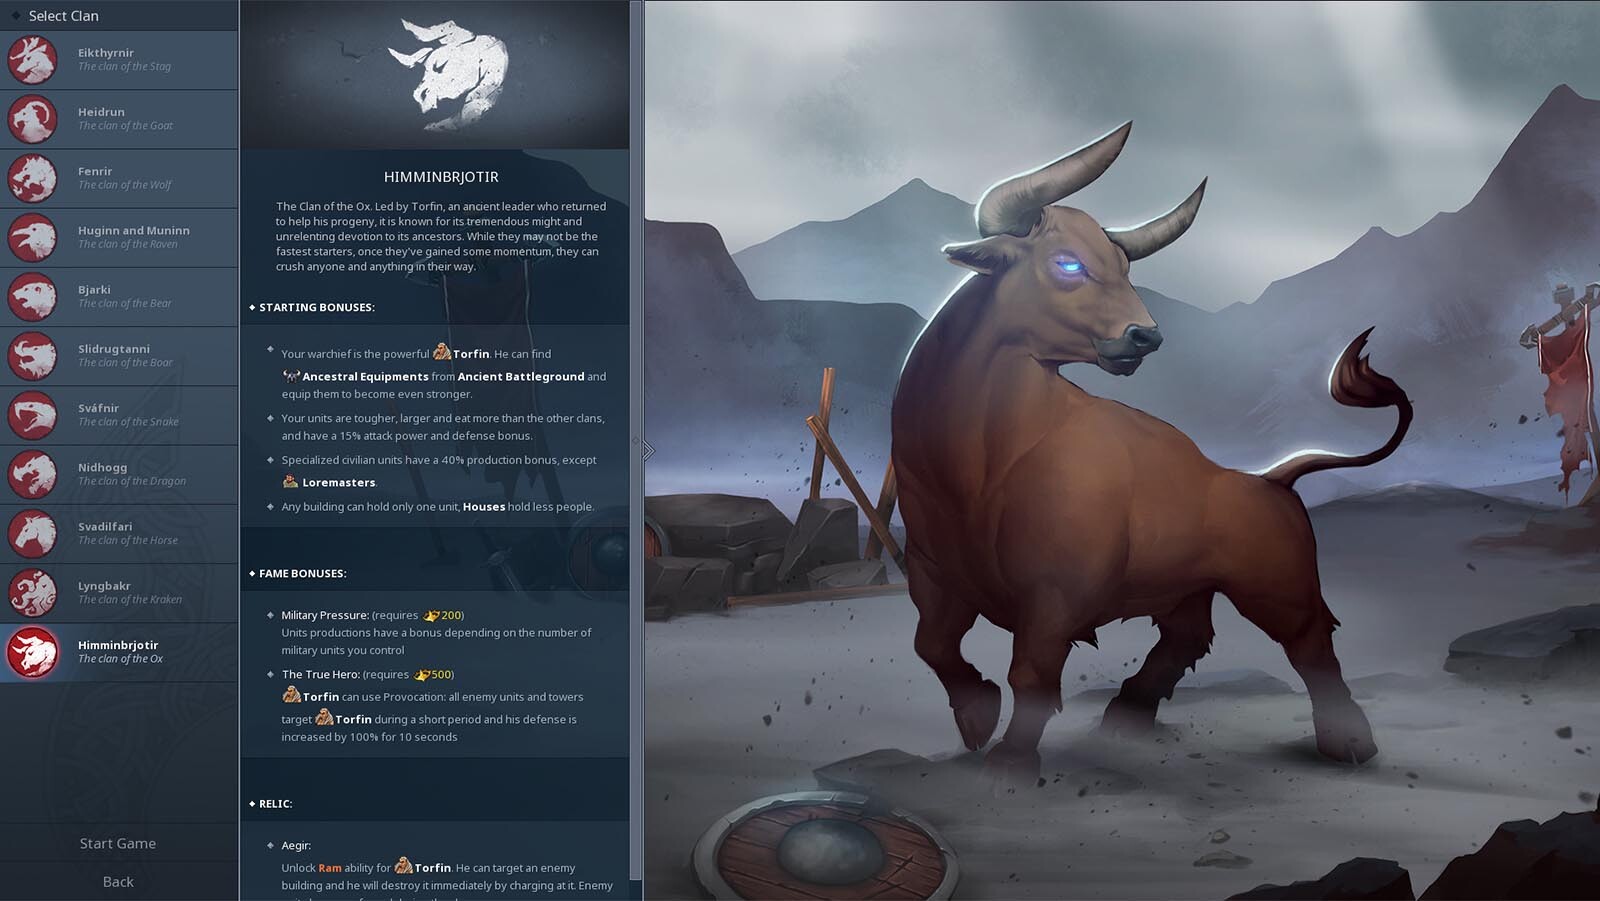 oxen steam backgrounds